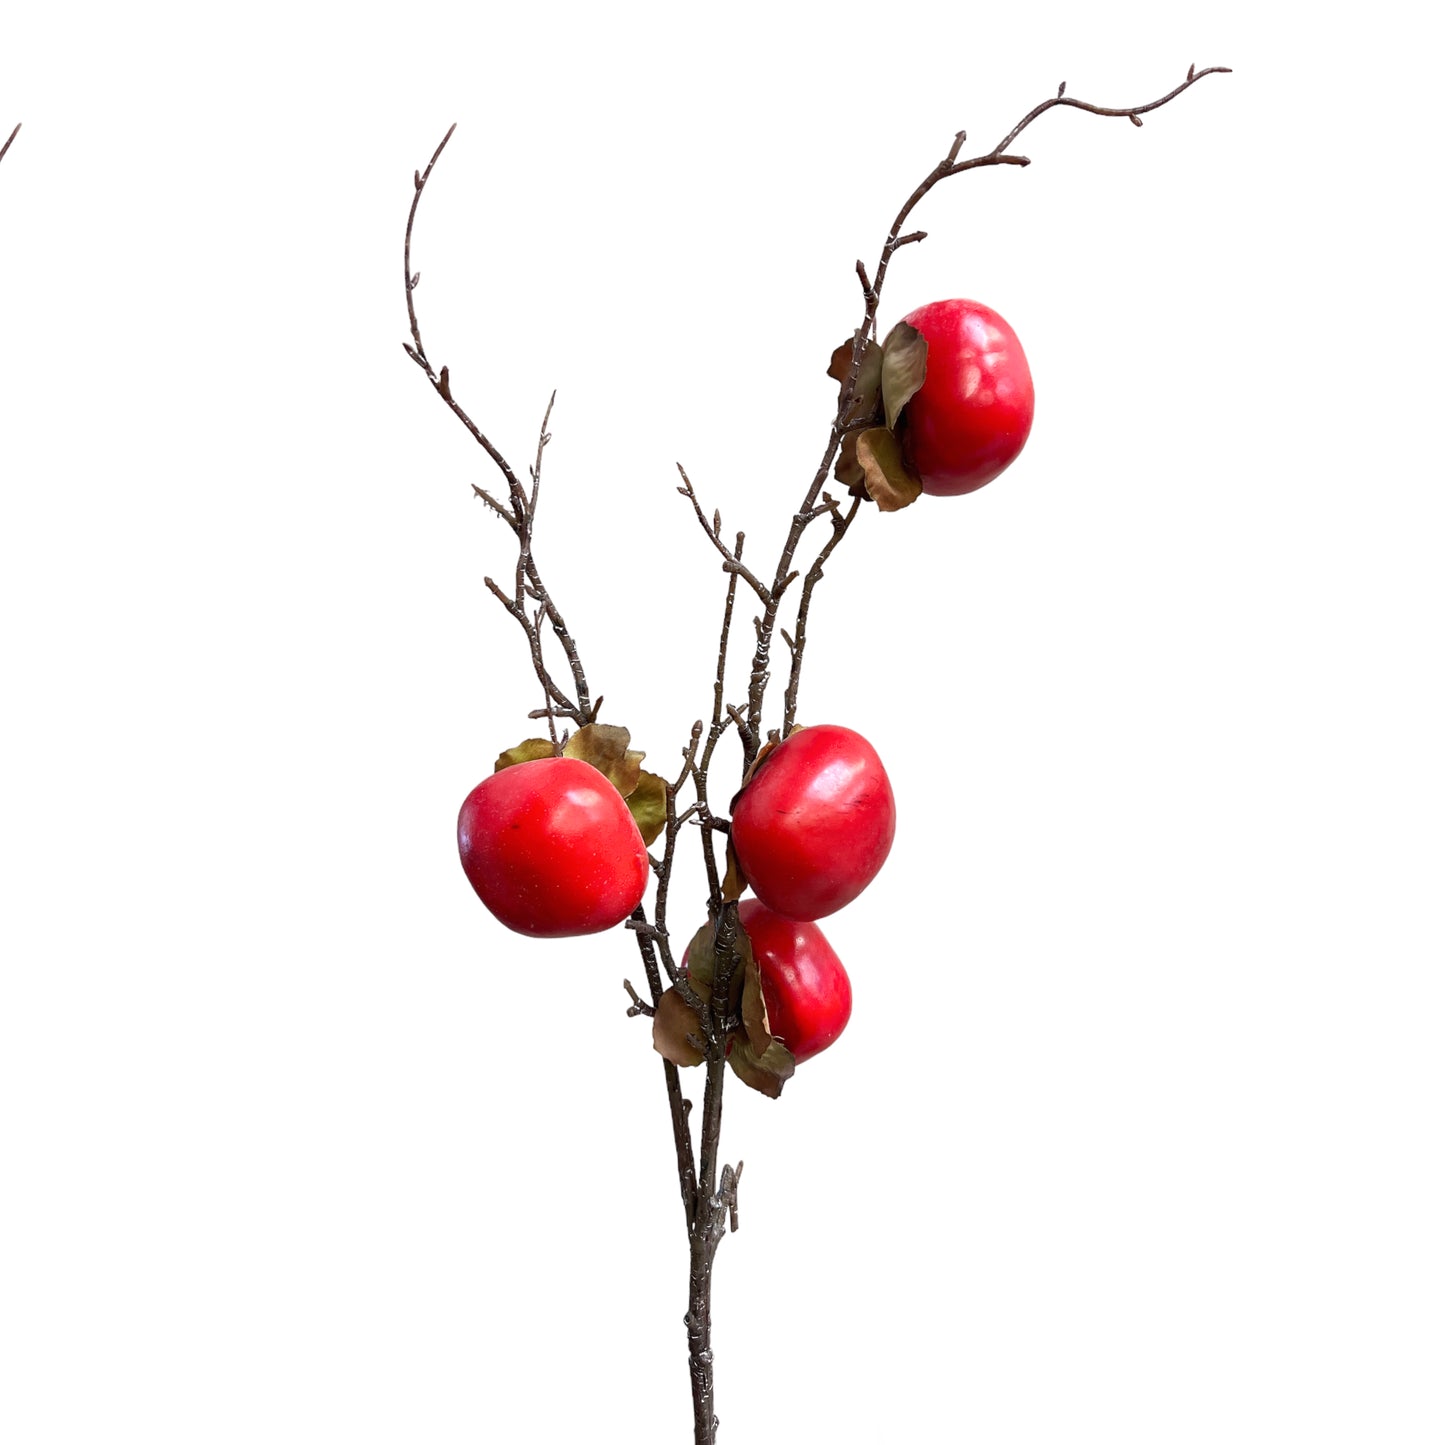 Set of 2 Artificial Persimmon Branches - Lifelike Decorative Stems, 30 inches Tall